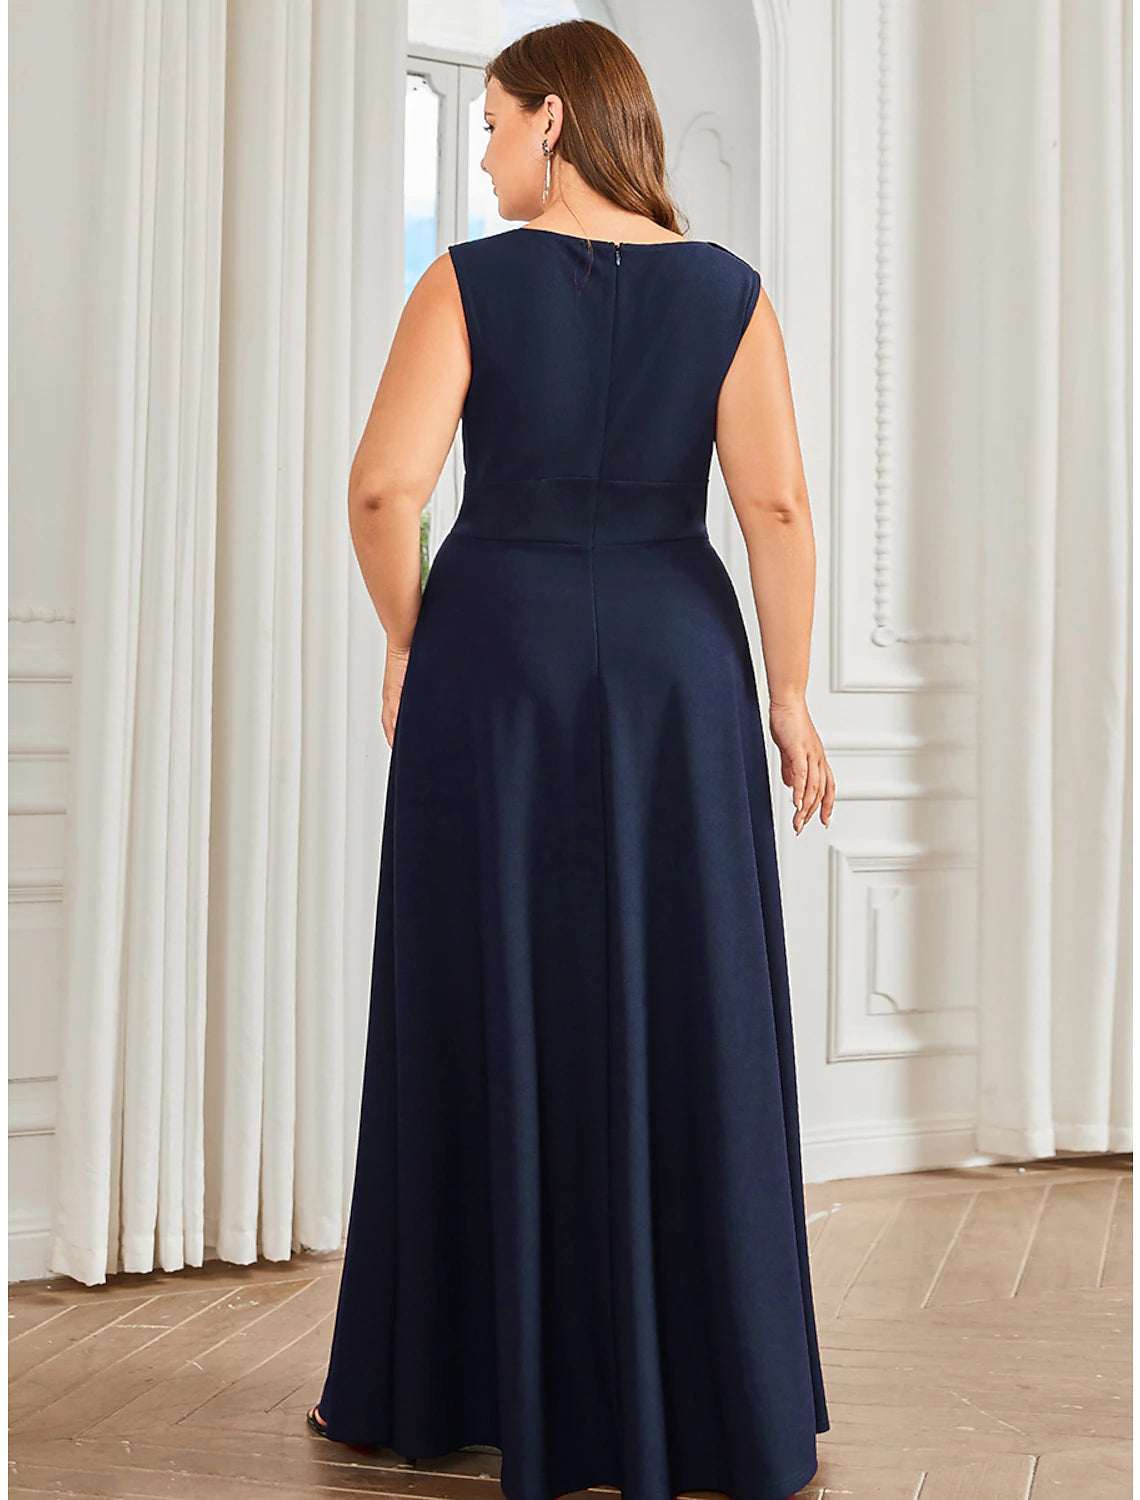 A-Line Evening Gown Plus Size Dress Formal Floor Length Sleeveless Jewel Neck Polyester with Draping Appliques Pure Color